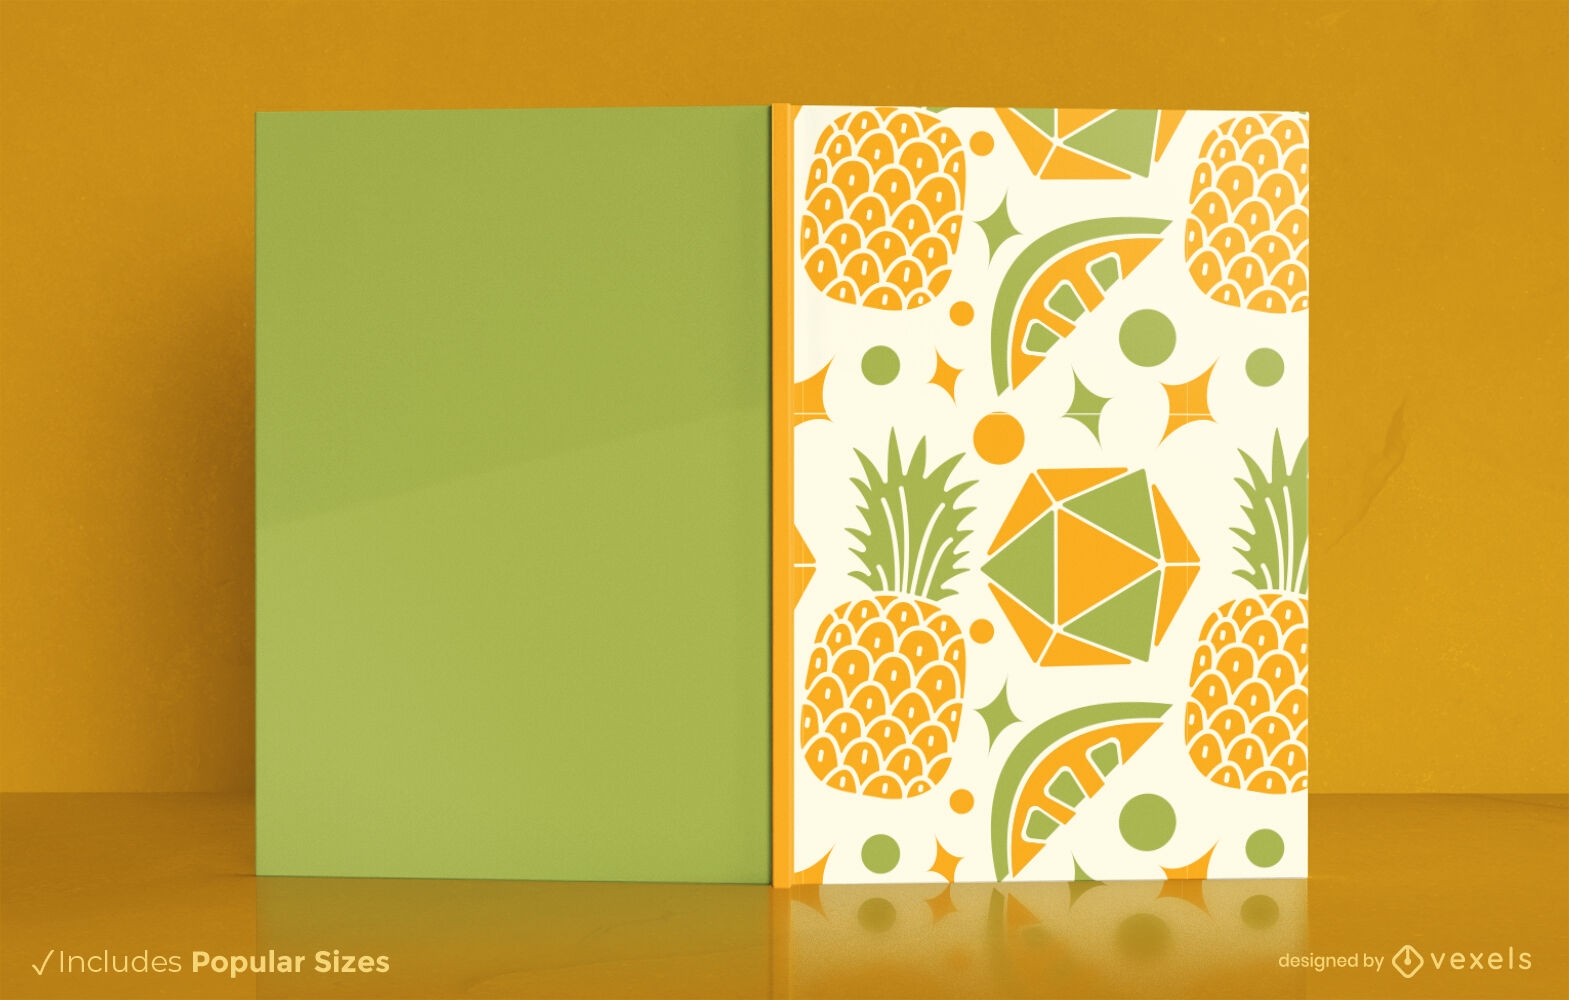 Pineapple pattern book cover design